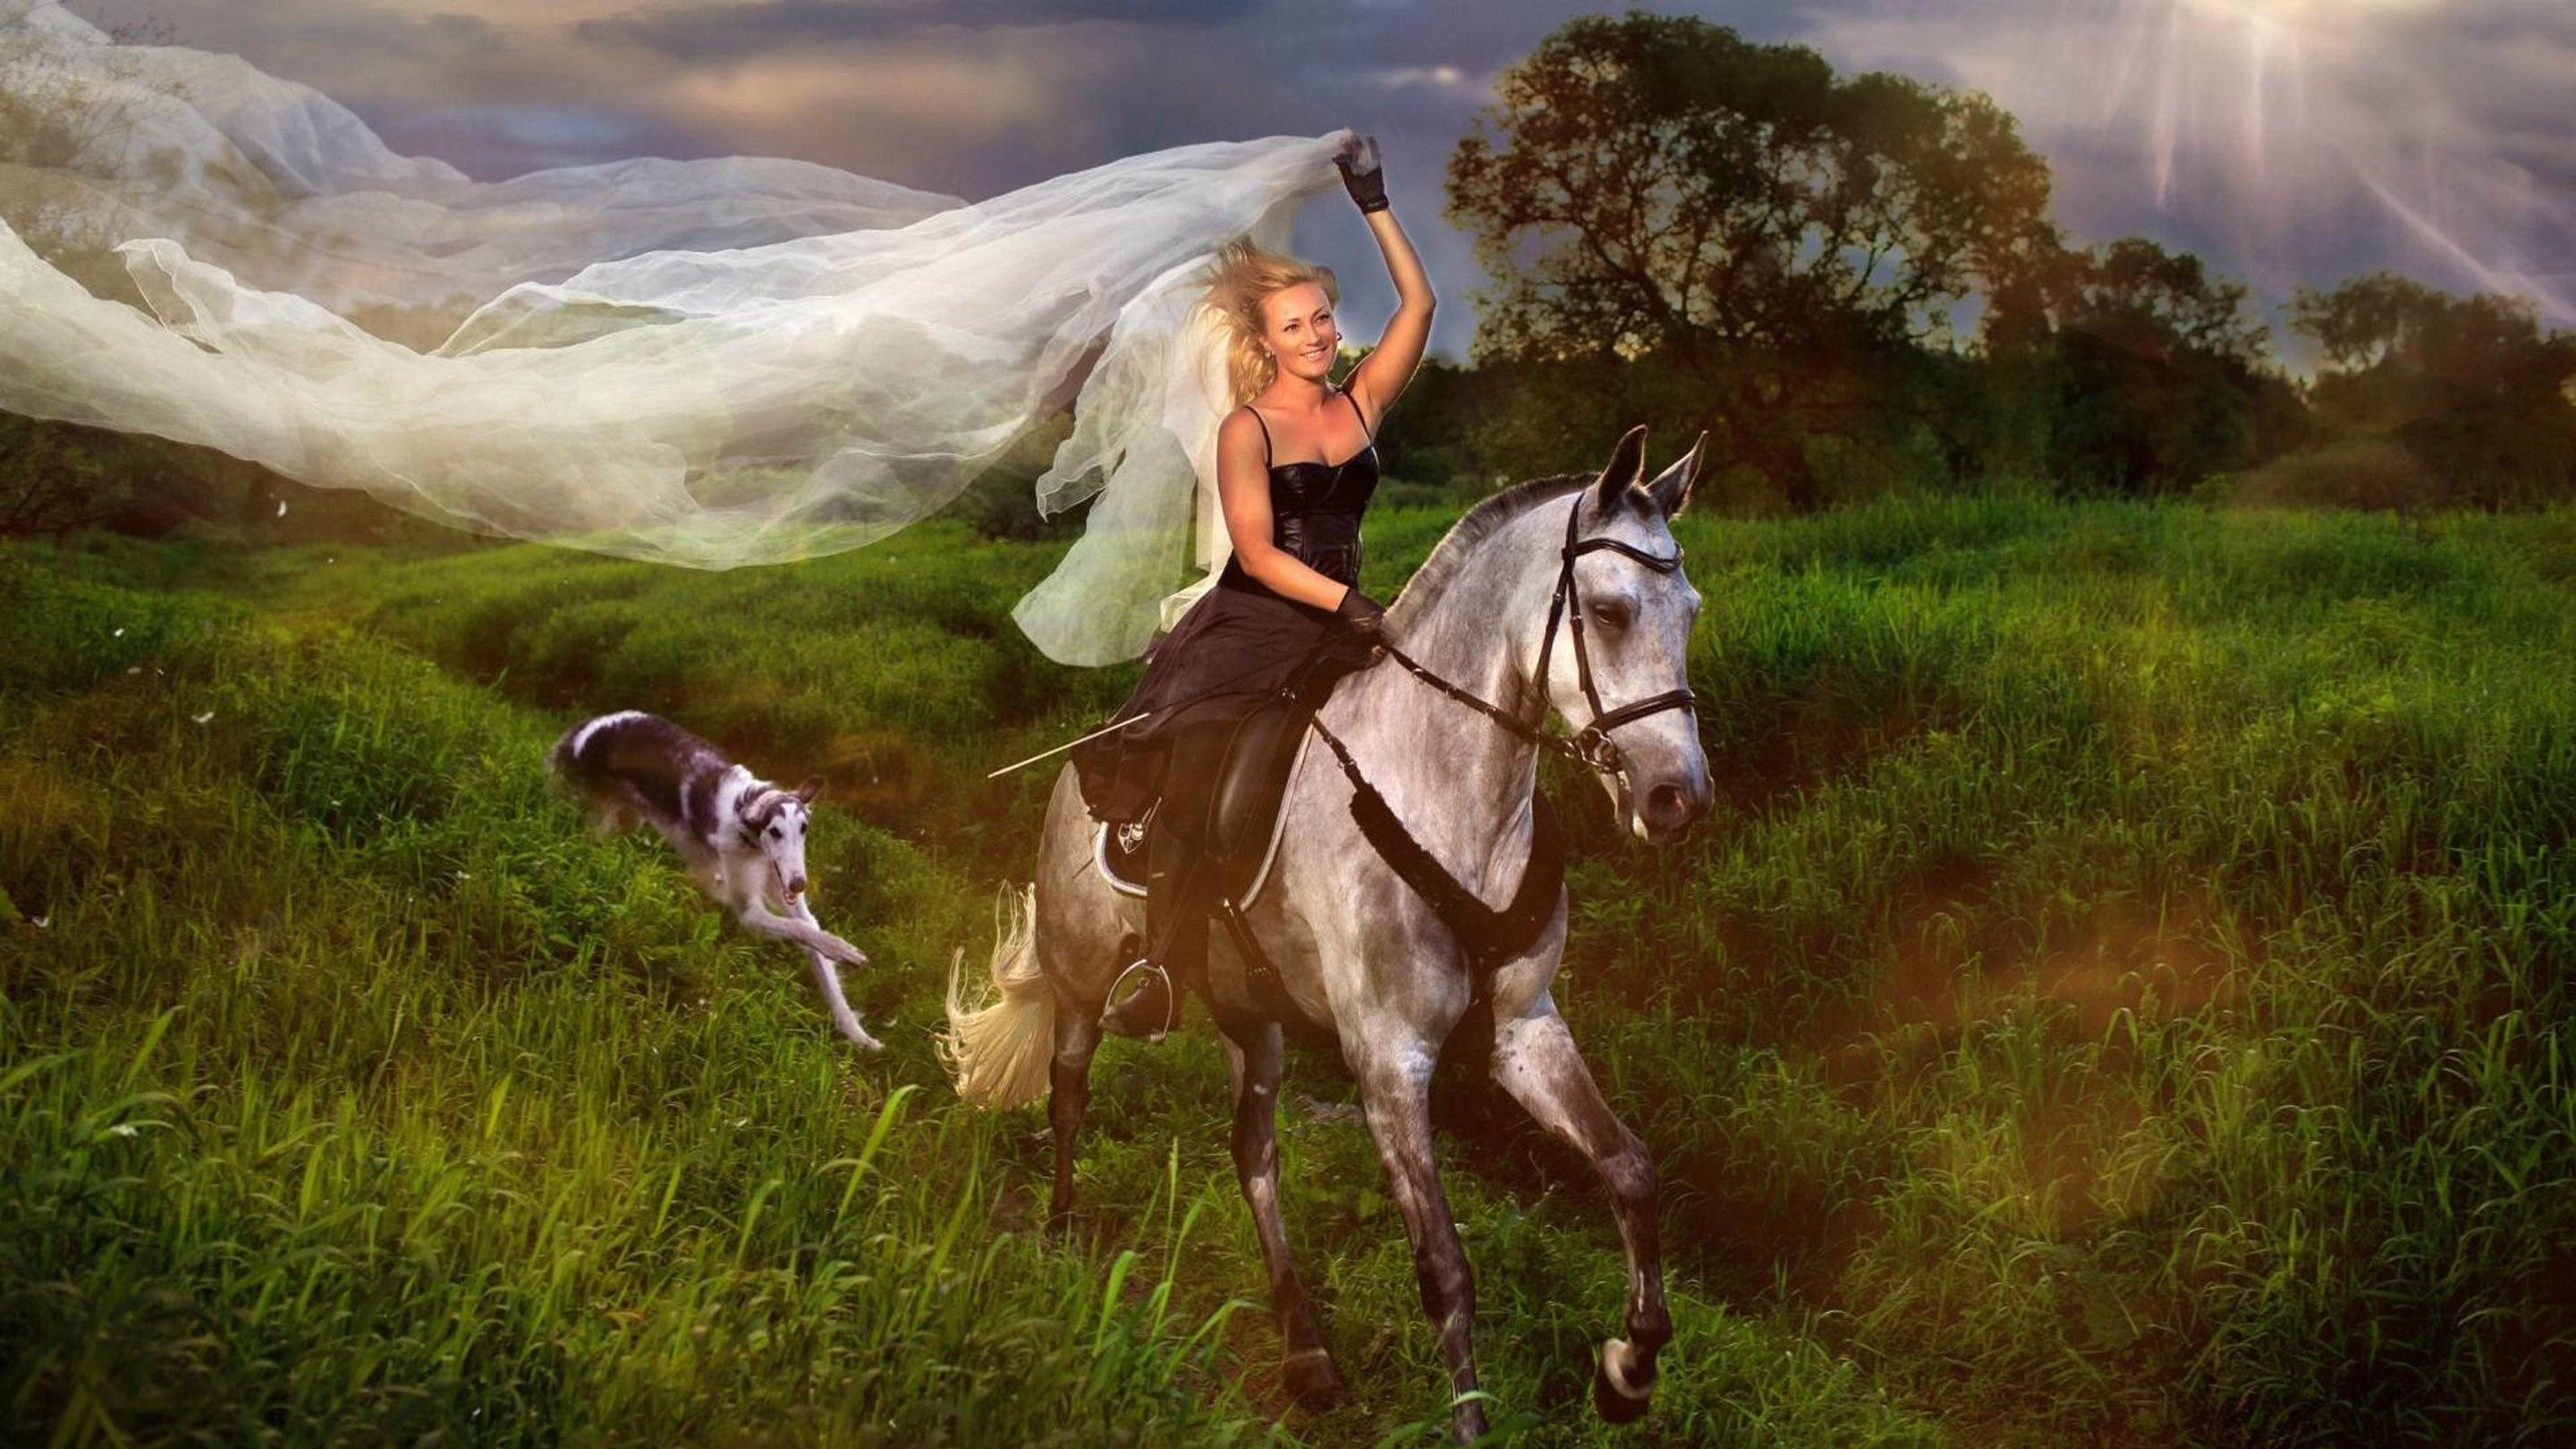 Blue Girl Jockey And White Horse Hair Veil Field With Green Grass, Road